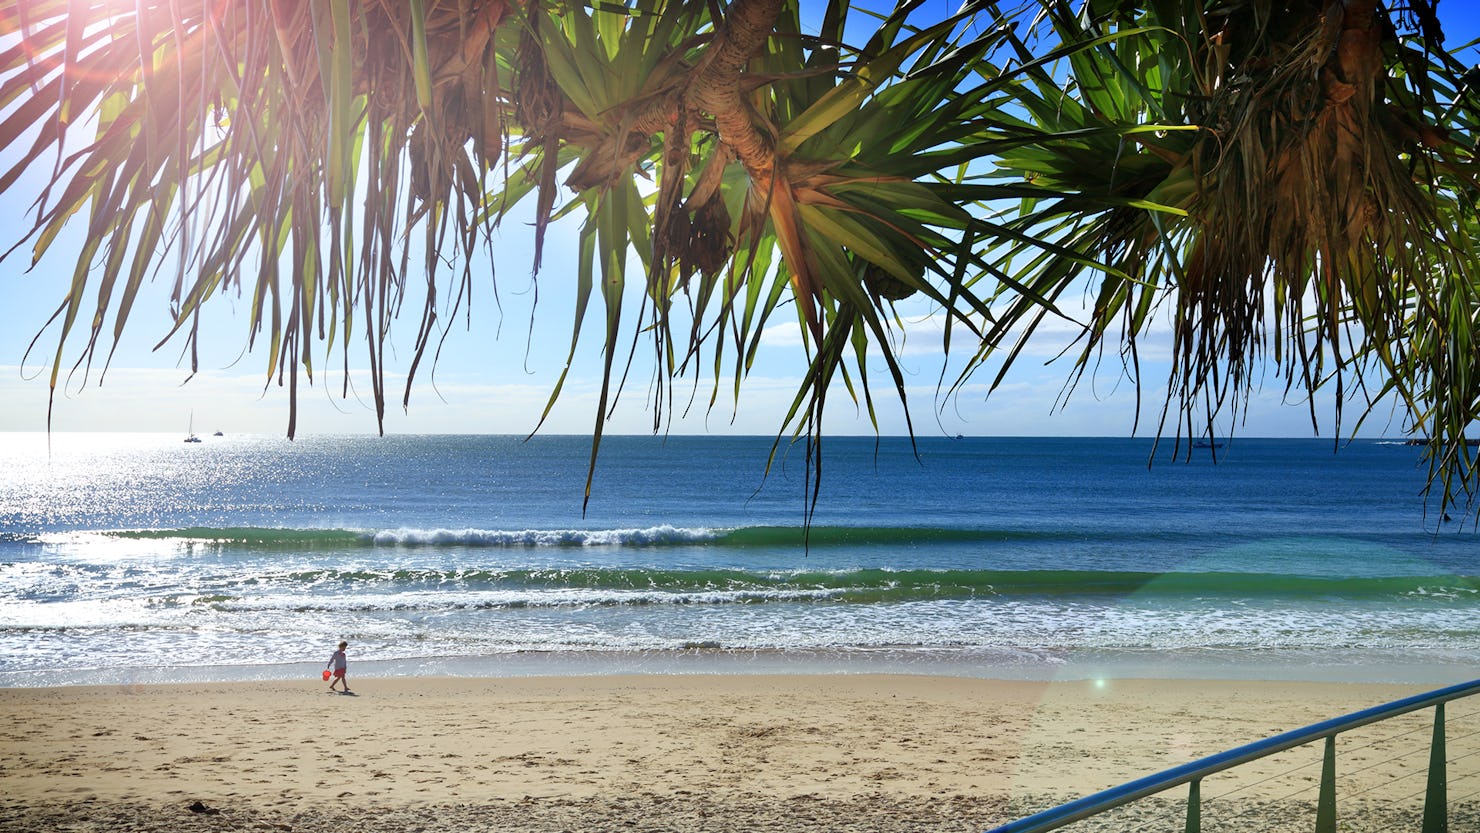 Chase an endless summer on the Sunshine Coast